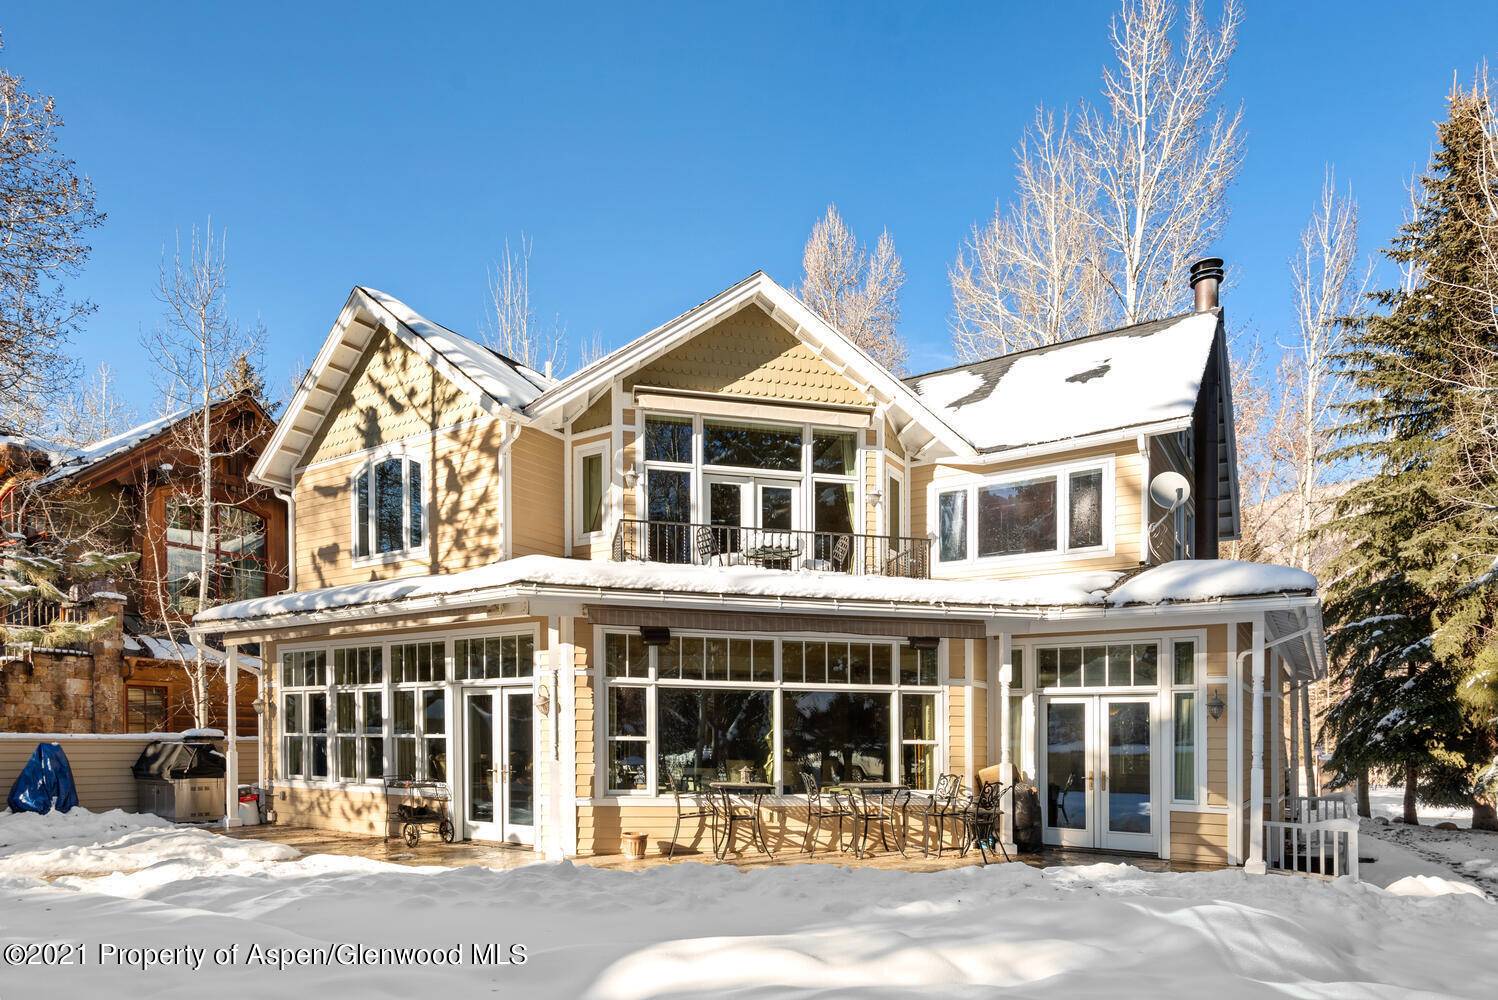 101 W Francis is situated in Aspen's desirable West End within a few blocks to the Hotel Jerome, world class dining, shops, parks and everything Aspen has to offer.